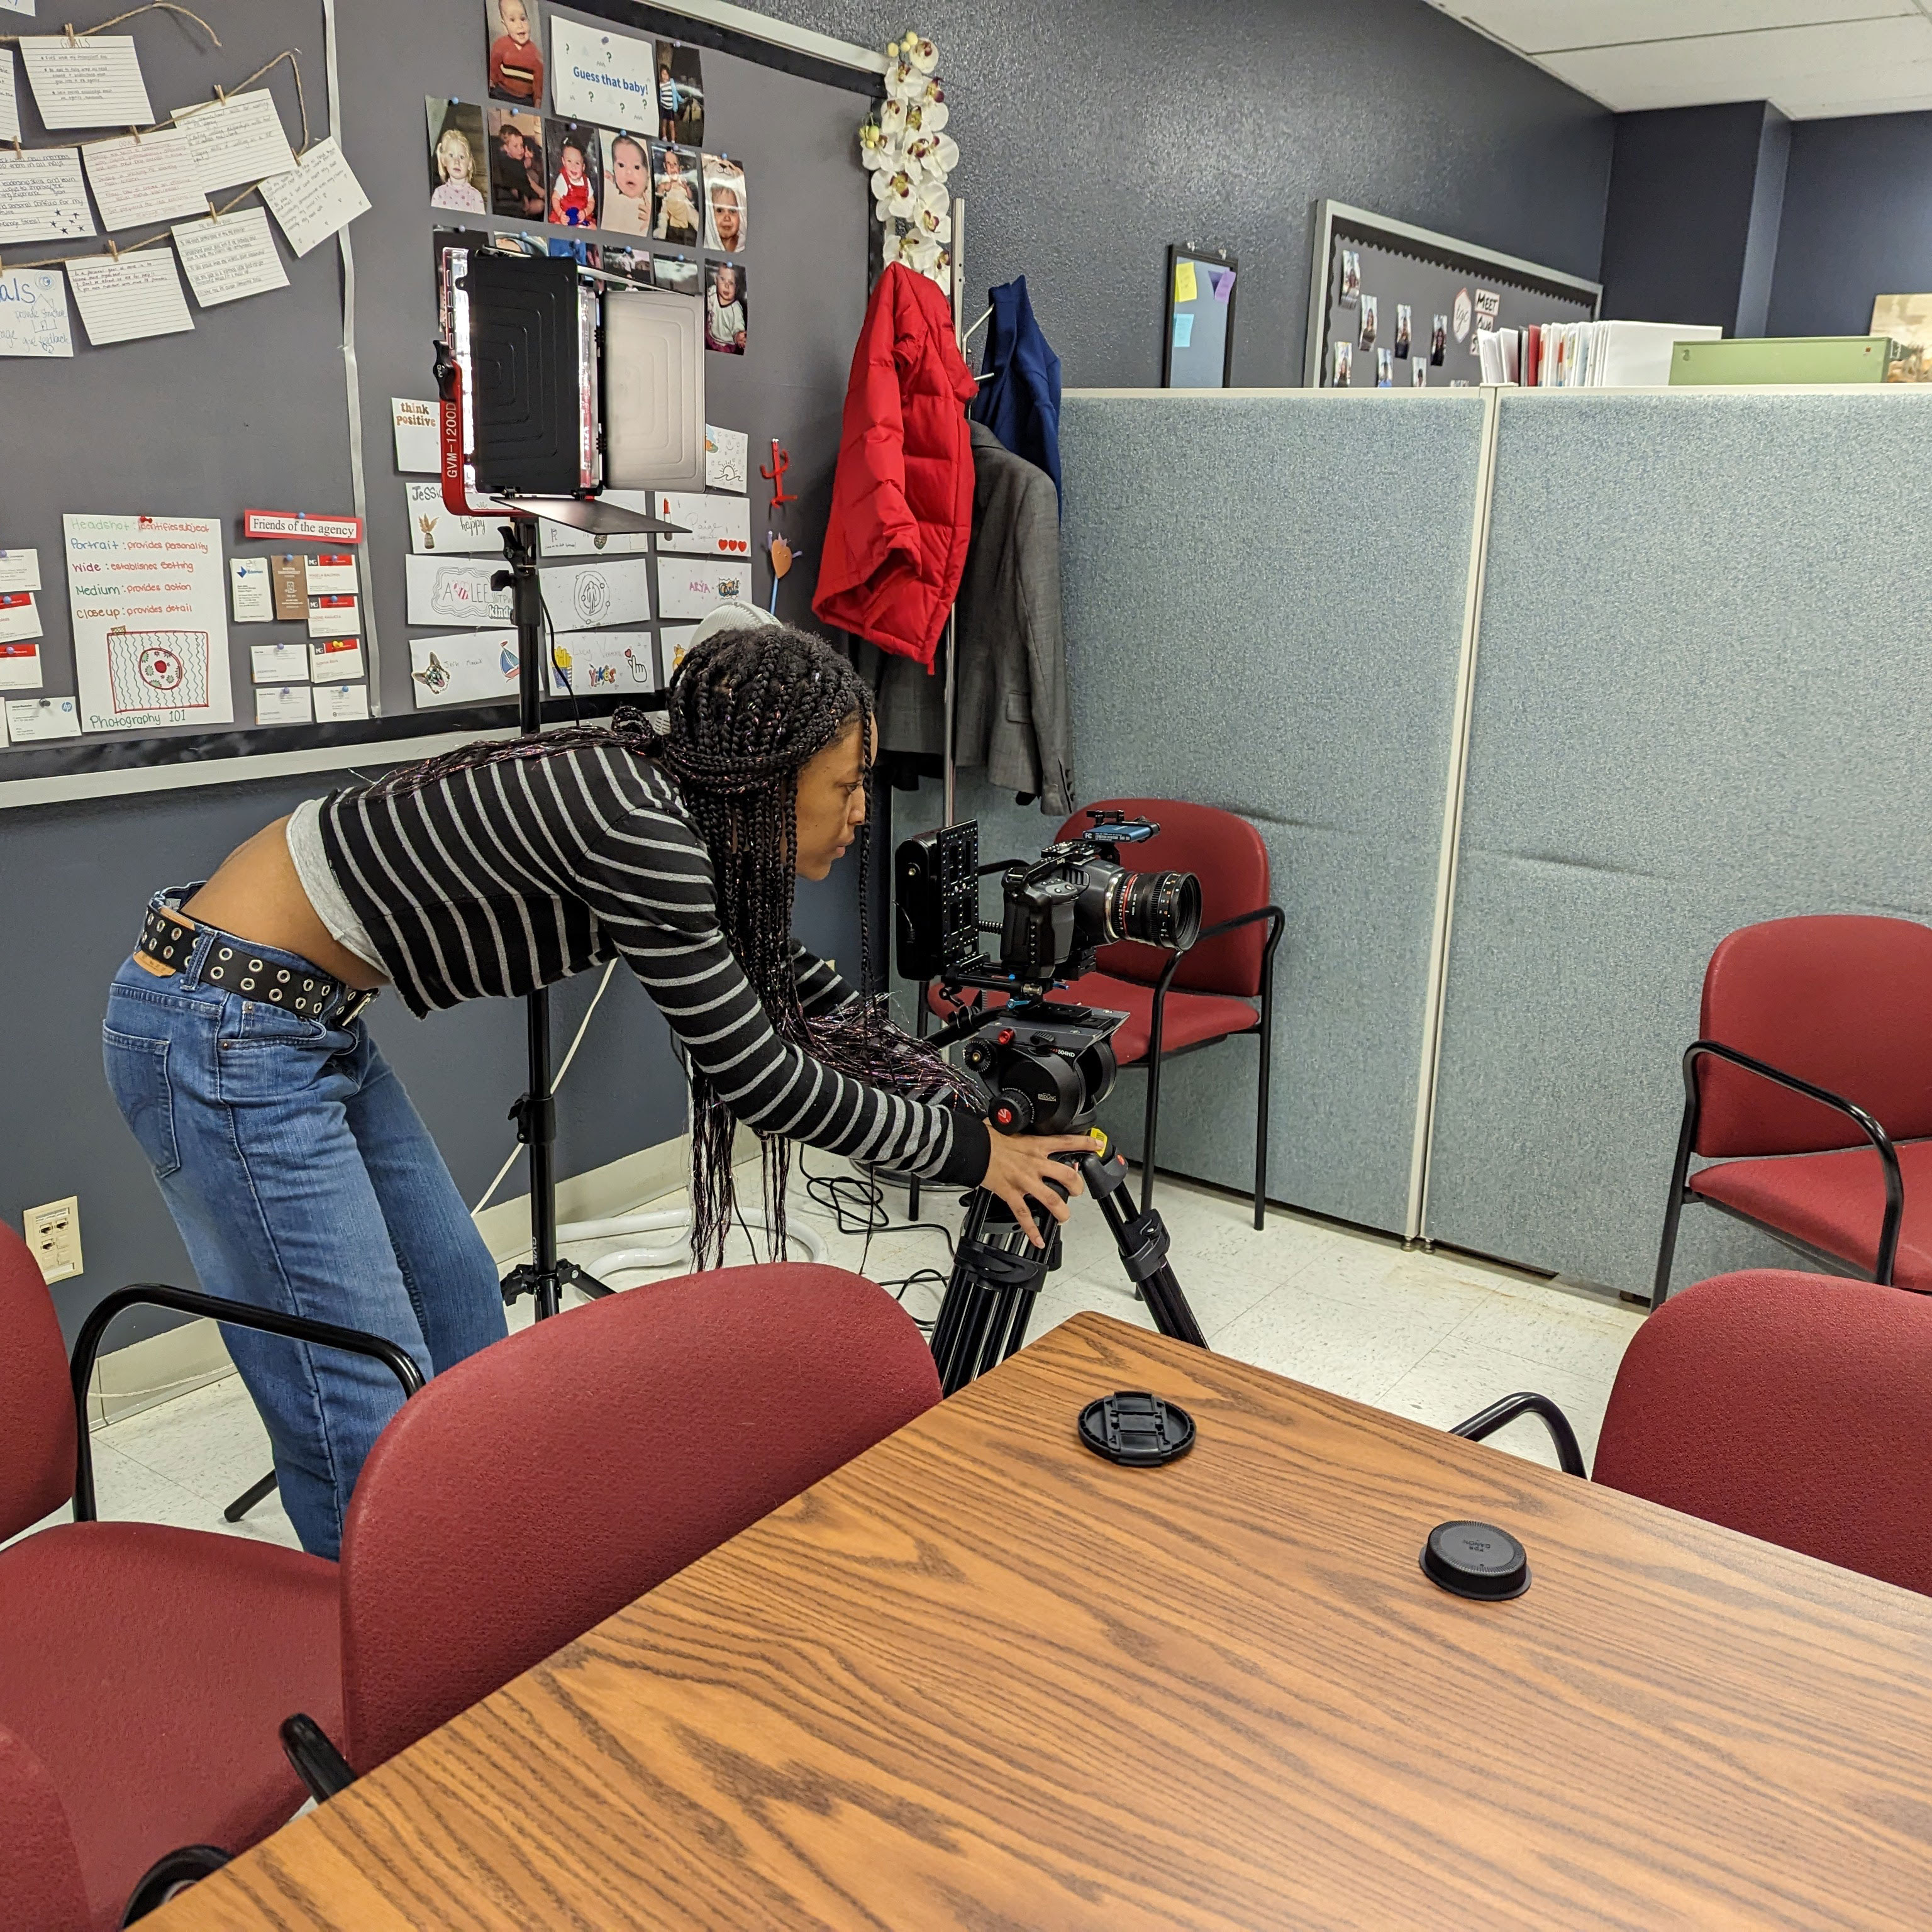 The video team setting up cameras before interviewing people.